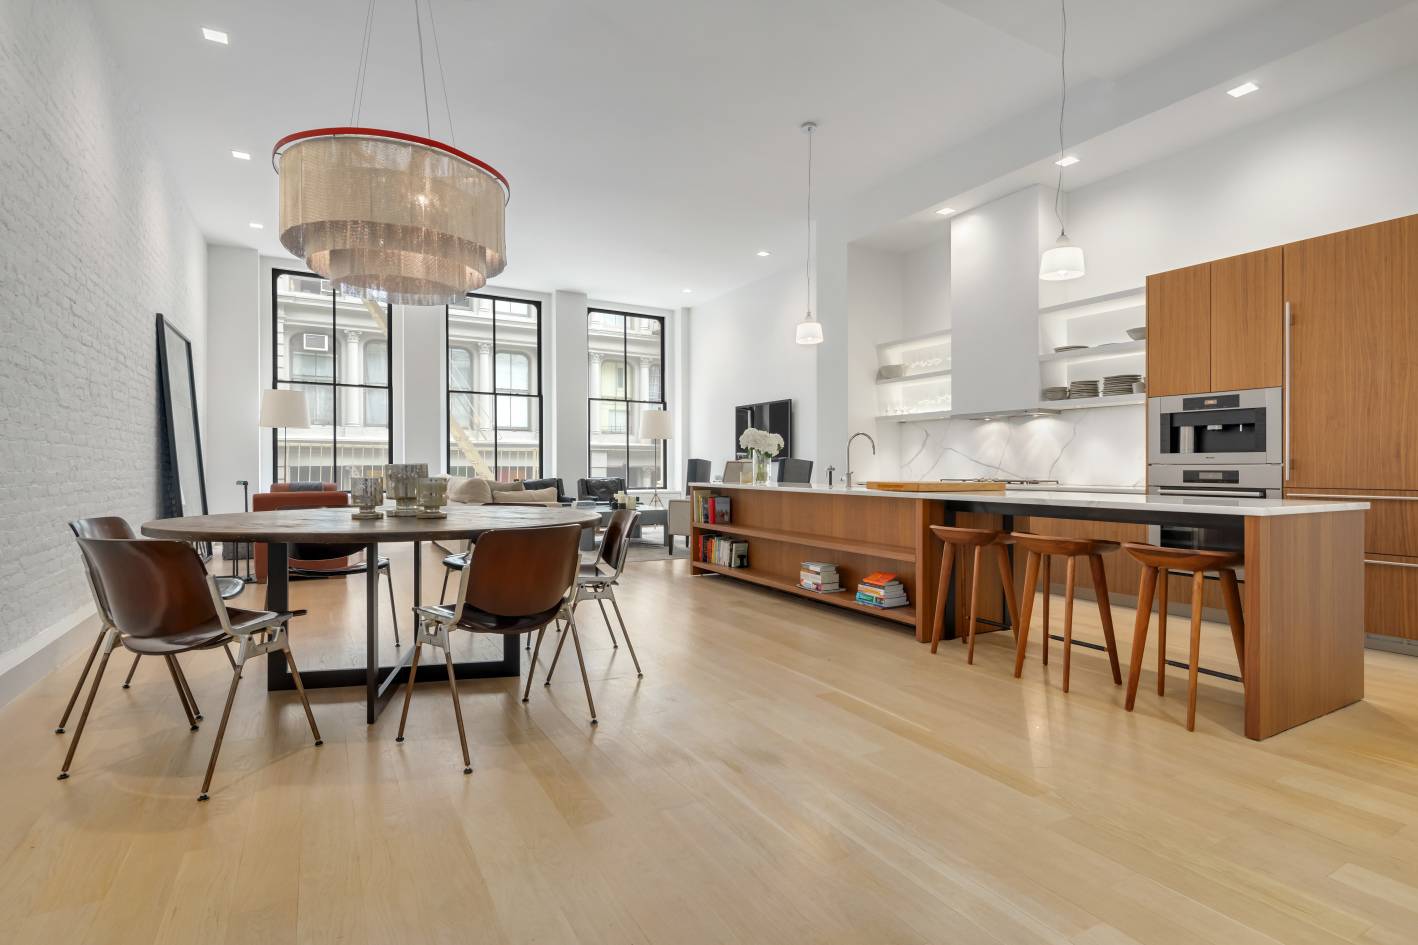 This mint and magnificent full floor loft is offered FULLY FURNISHED and is located on one of SoHo s most vibrant blocks.